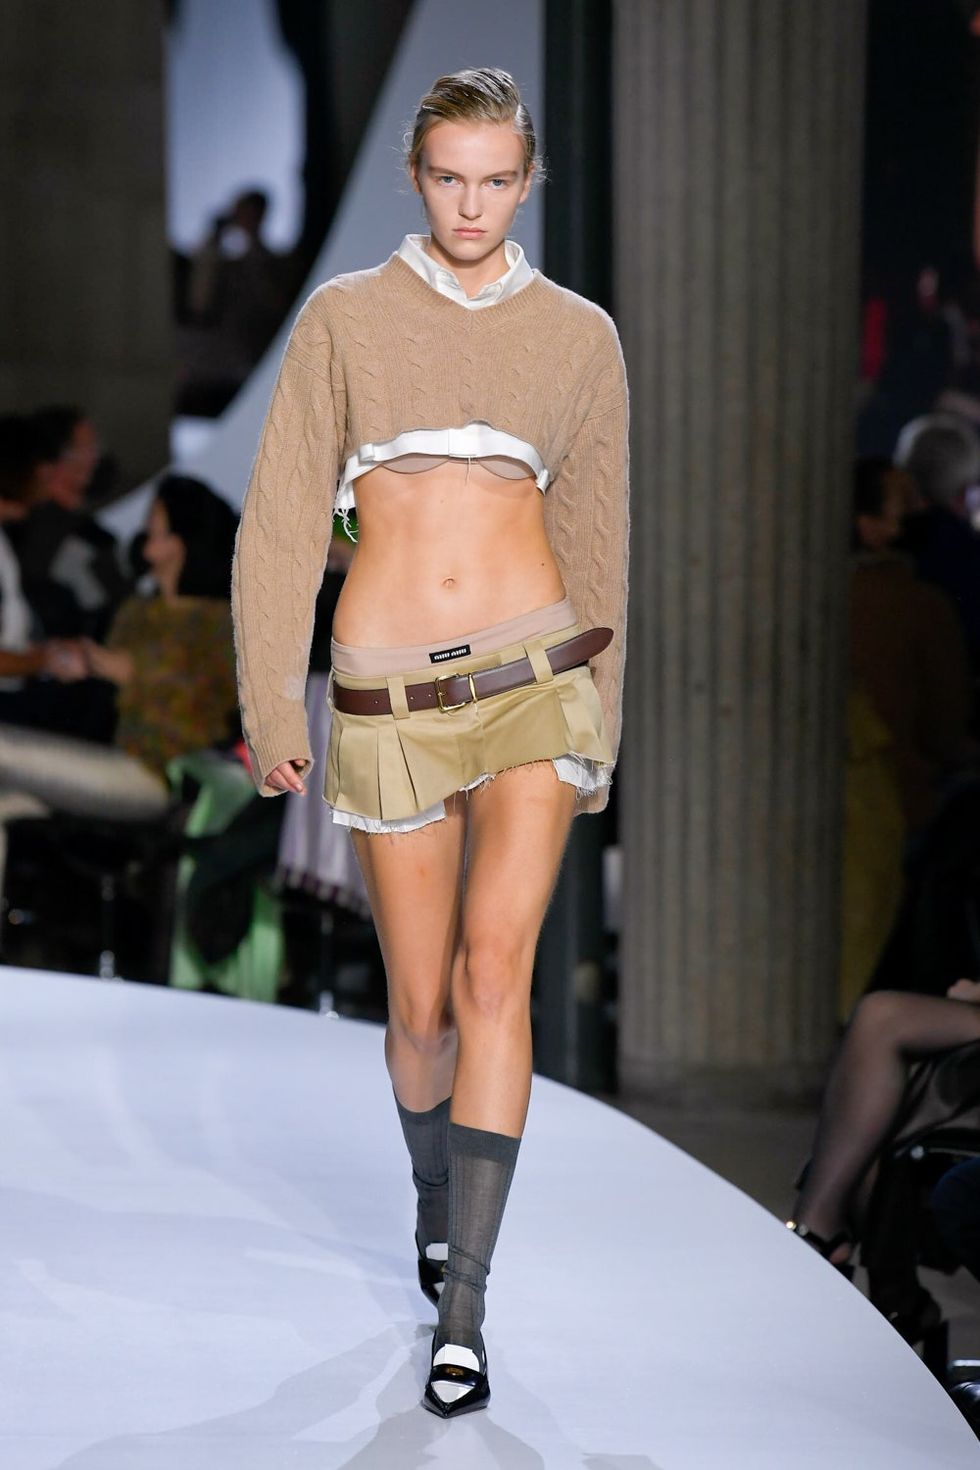 Prada brings back the trend of Y2K showing off the waist in a new collection